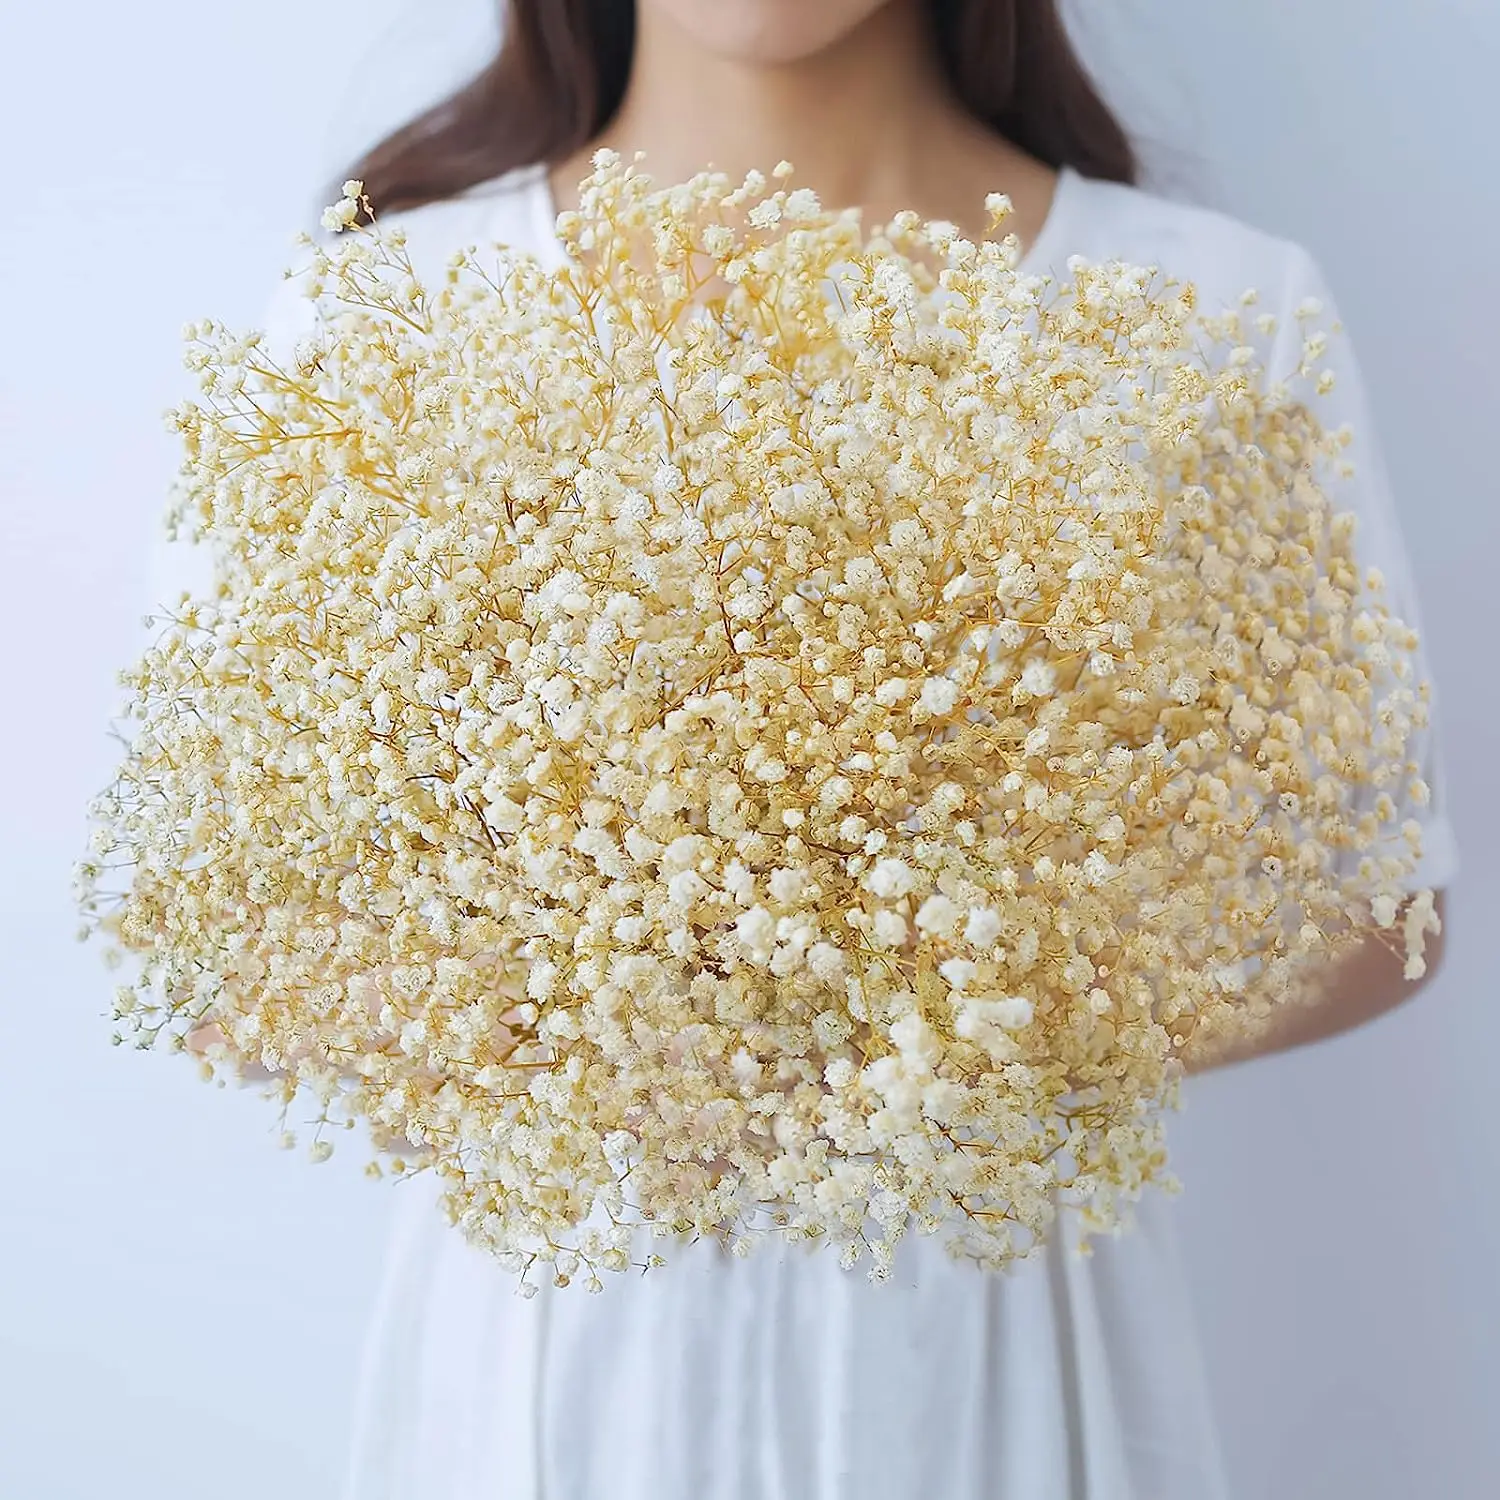 

Ivory White Dried Baby's Breath Bouquet,2000+ Flowers - Home Decor, Weddings, DIY Floral Projects, and Festive Christmas Decor